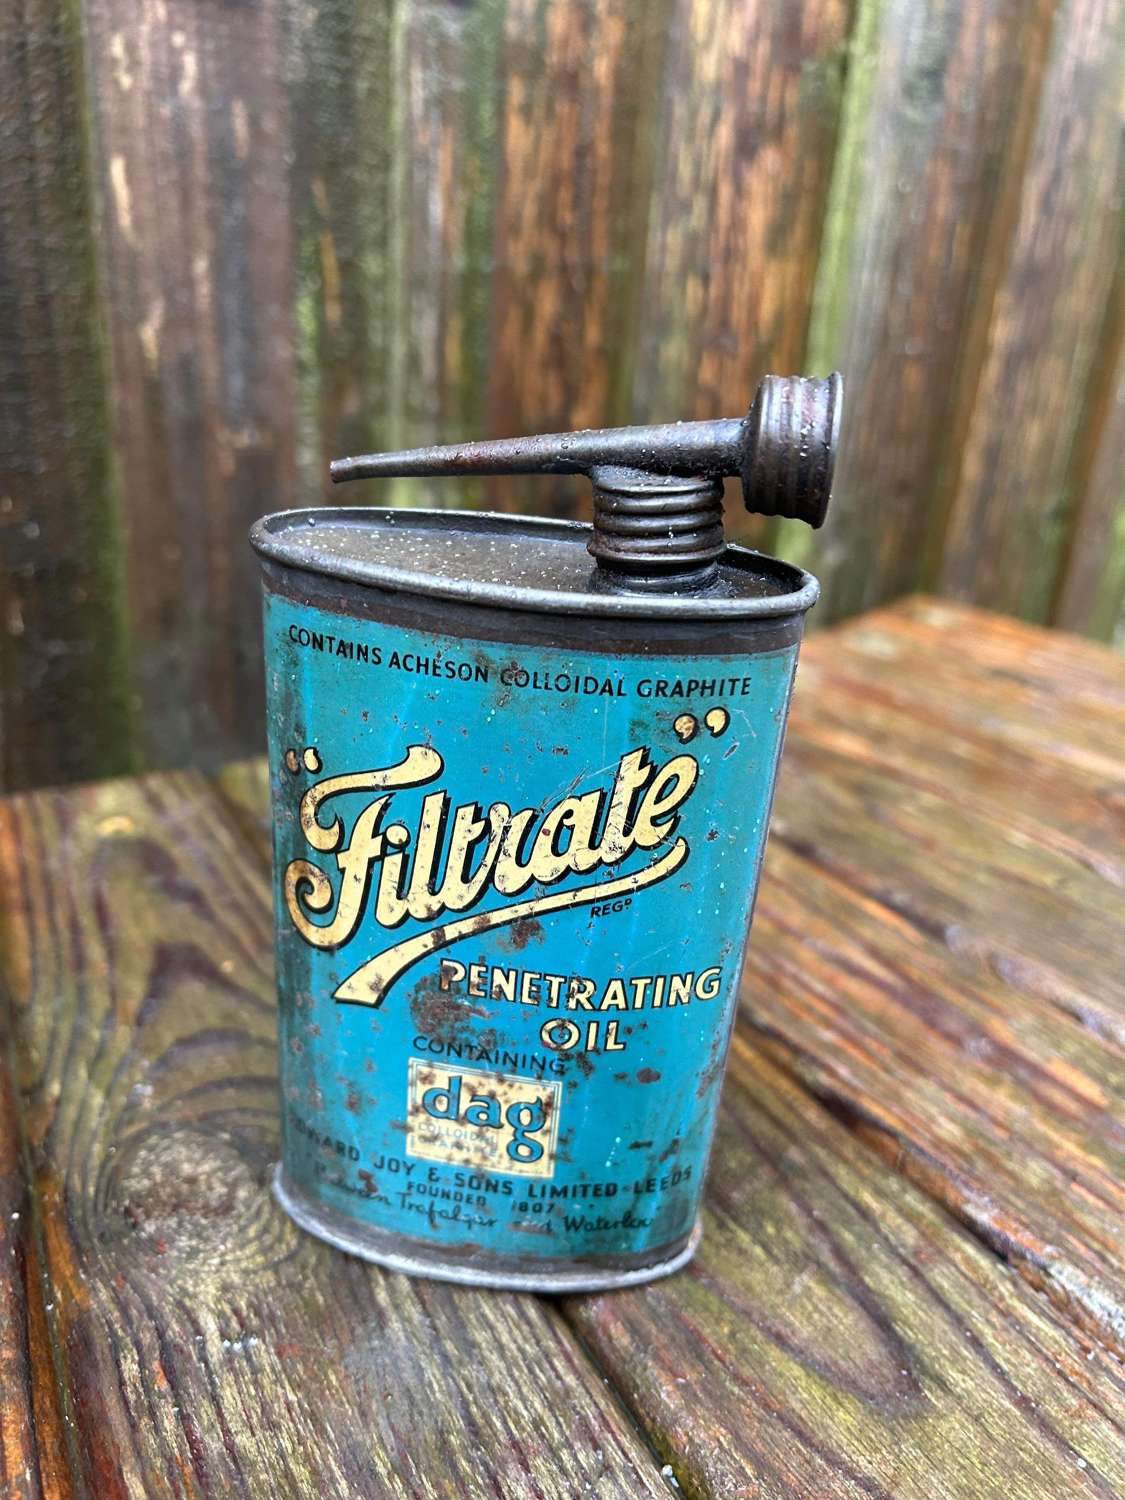 Lovely filtrate penetrating oil can